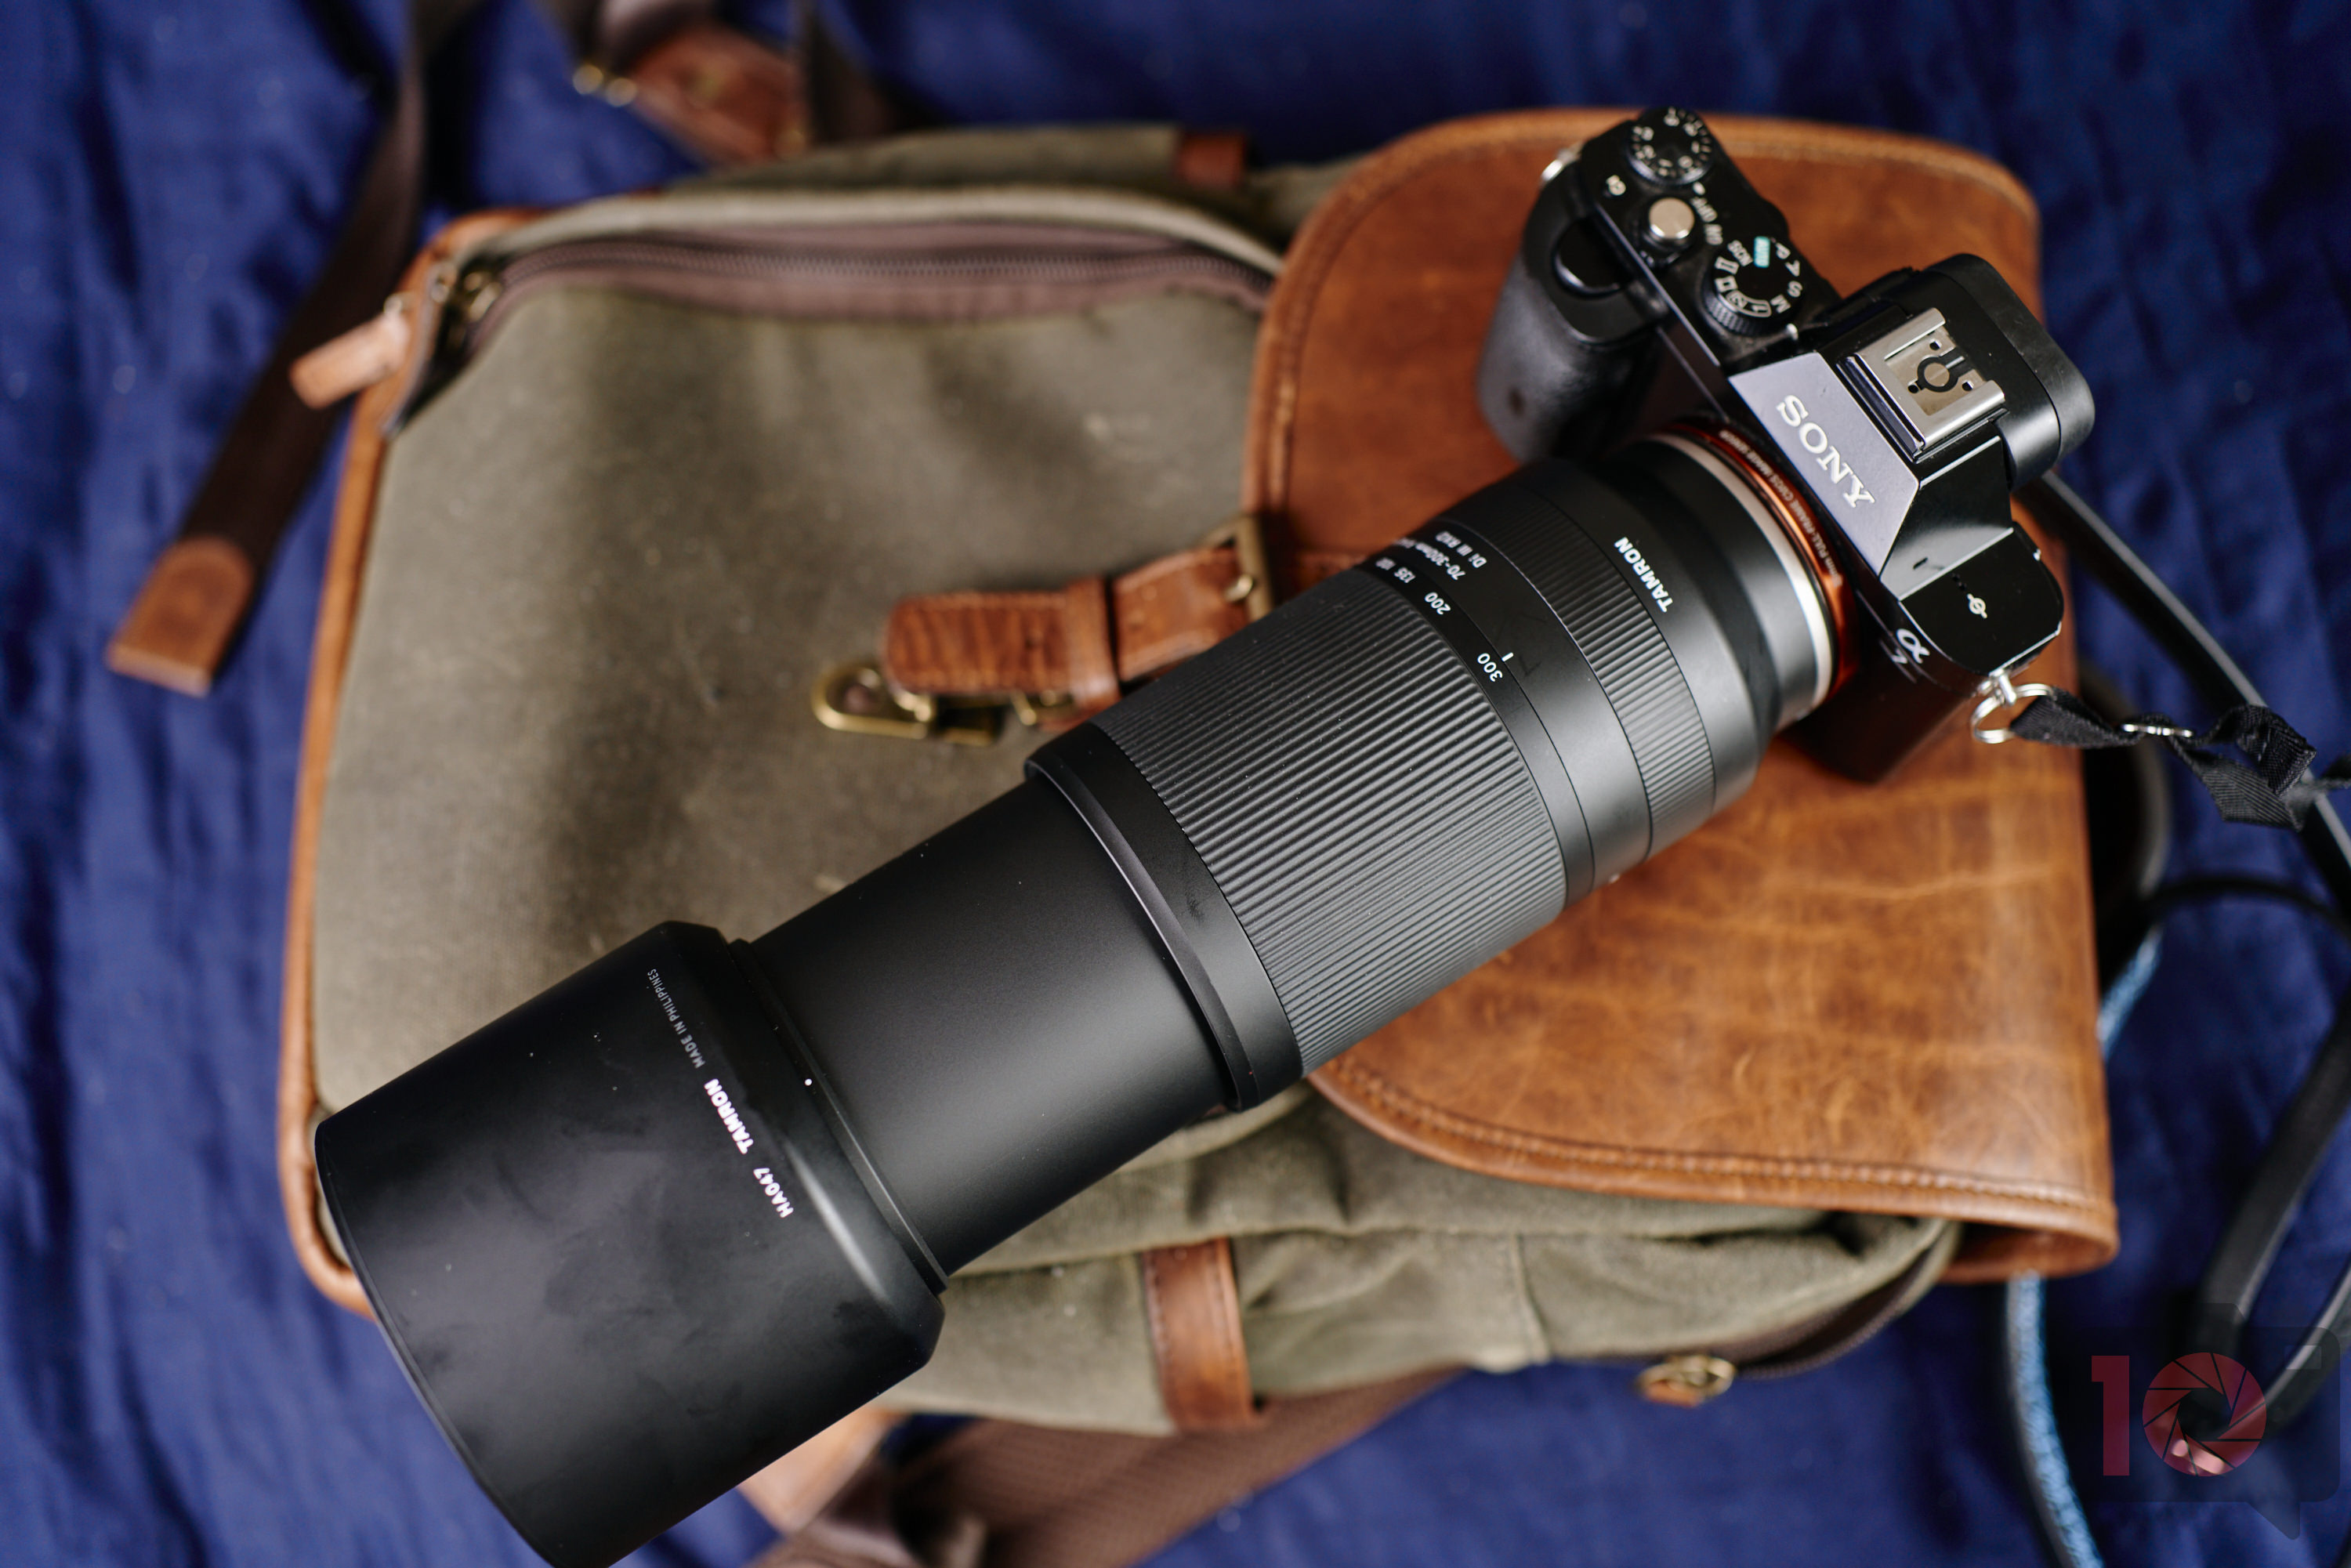 Tamron 70-300mm f/4.5-6.3 Di III RXD Review